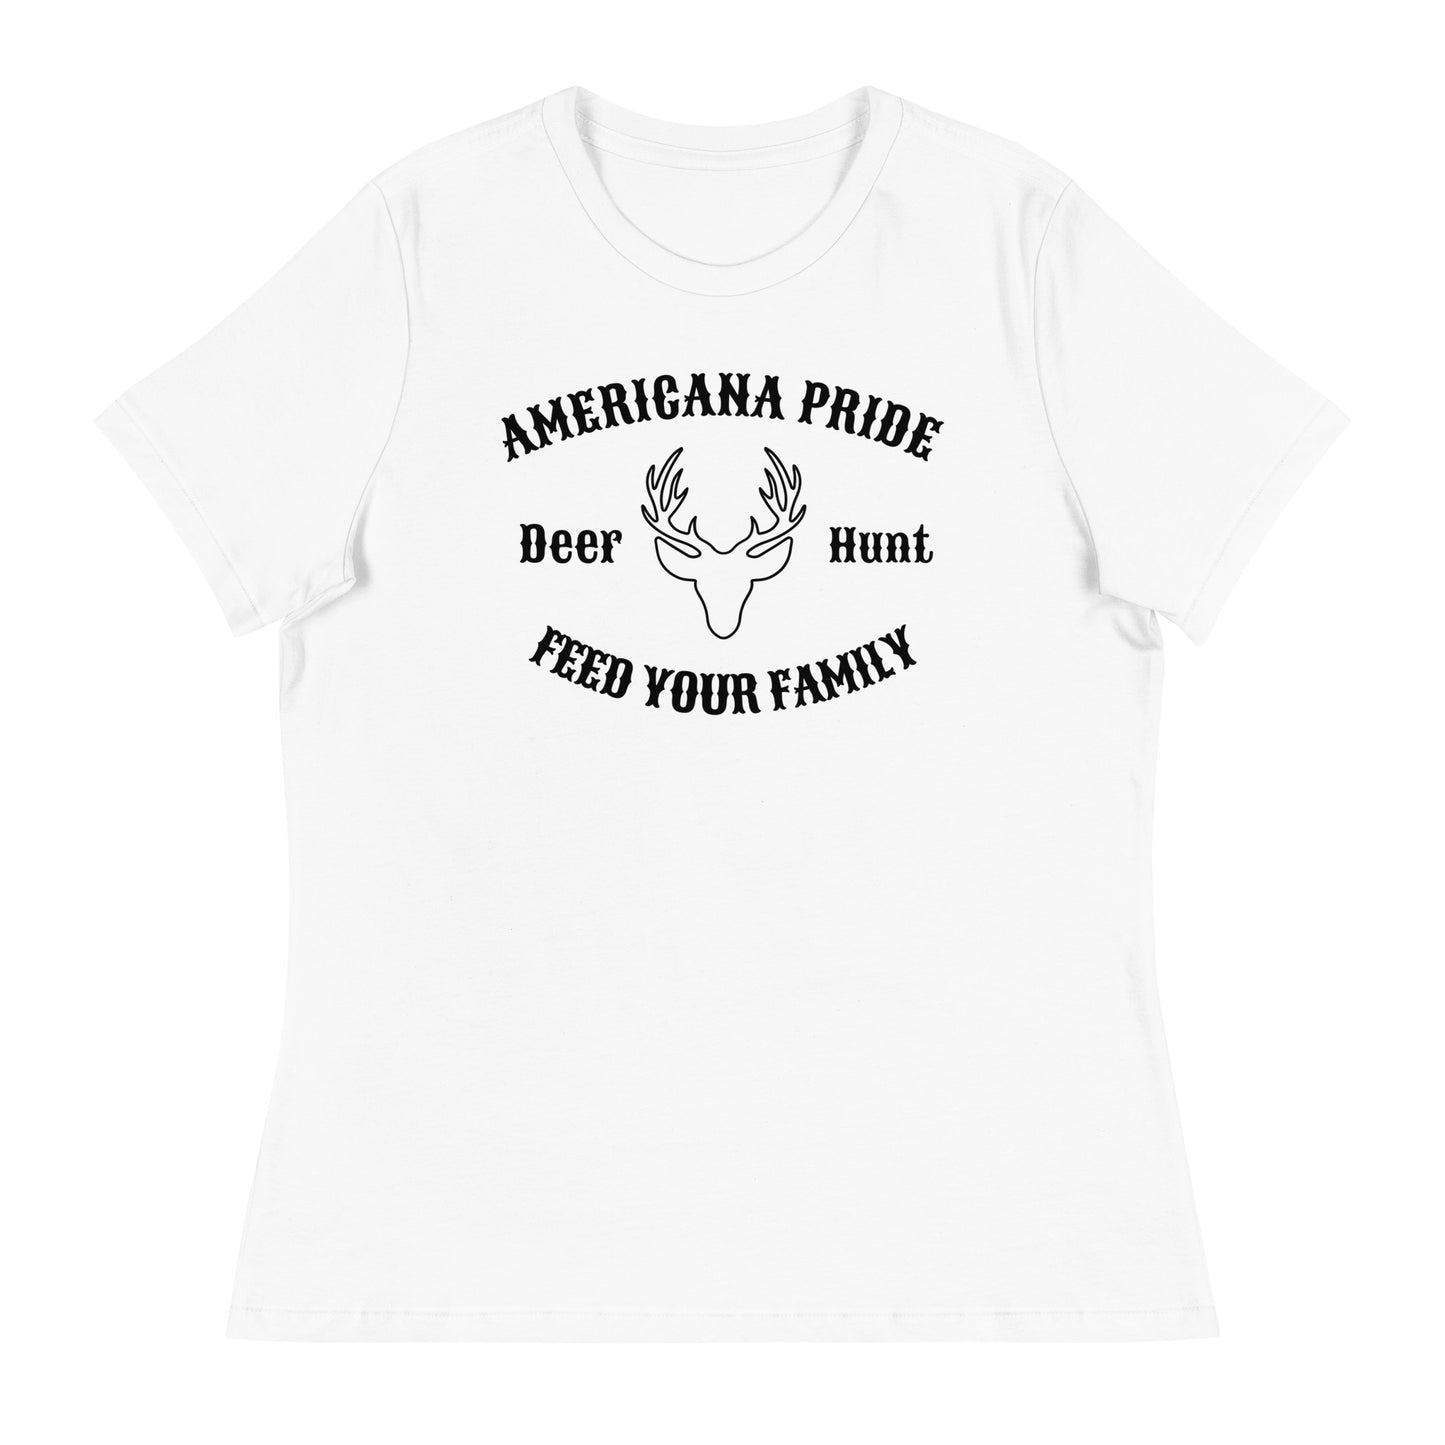 Americana Pride Deer Hunt Feed your family womens T-Shirt